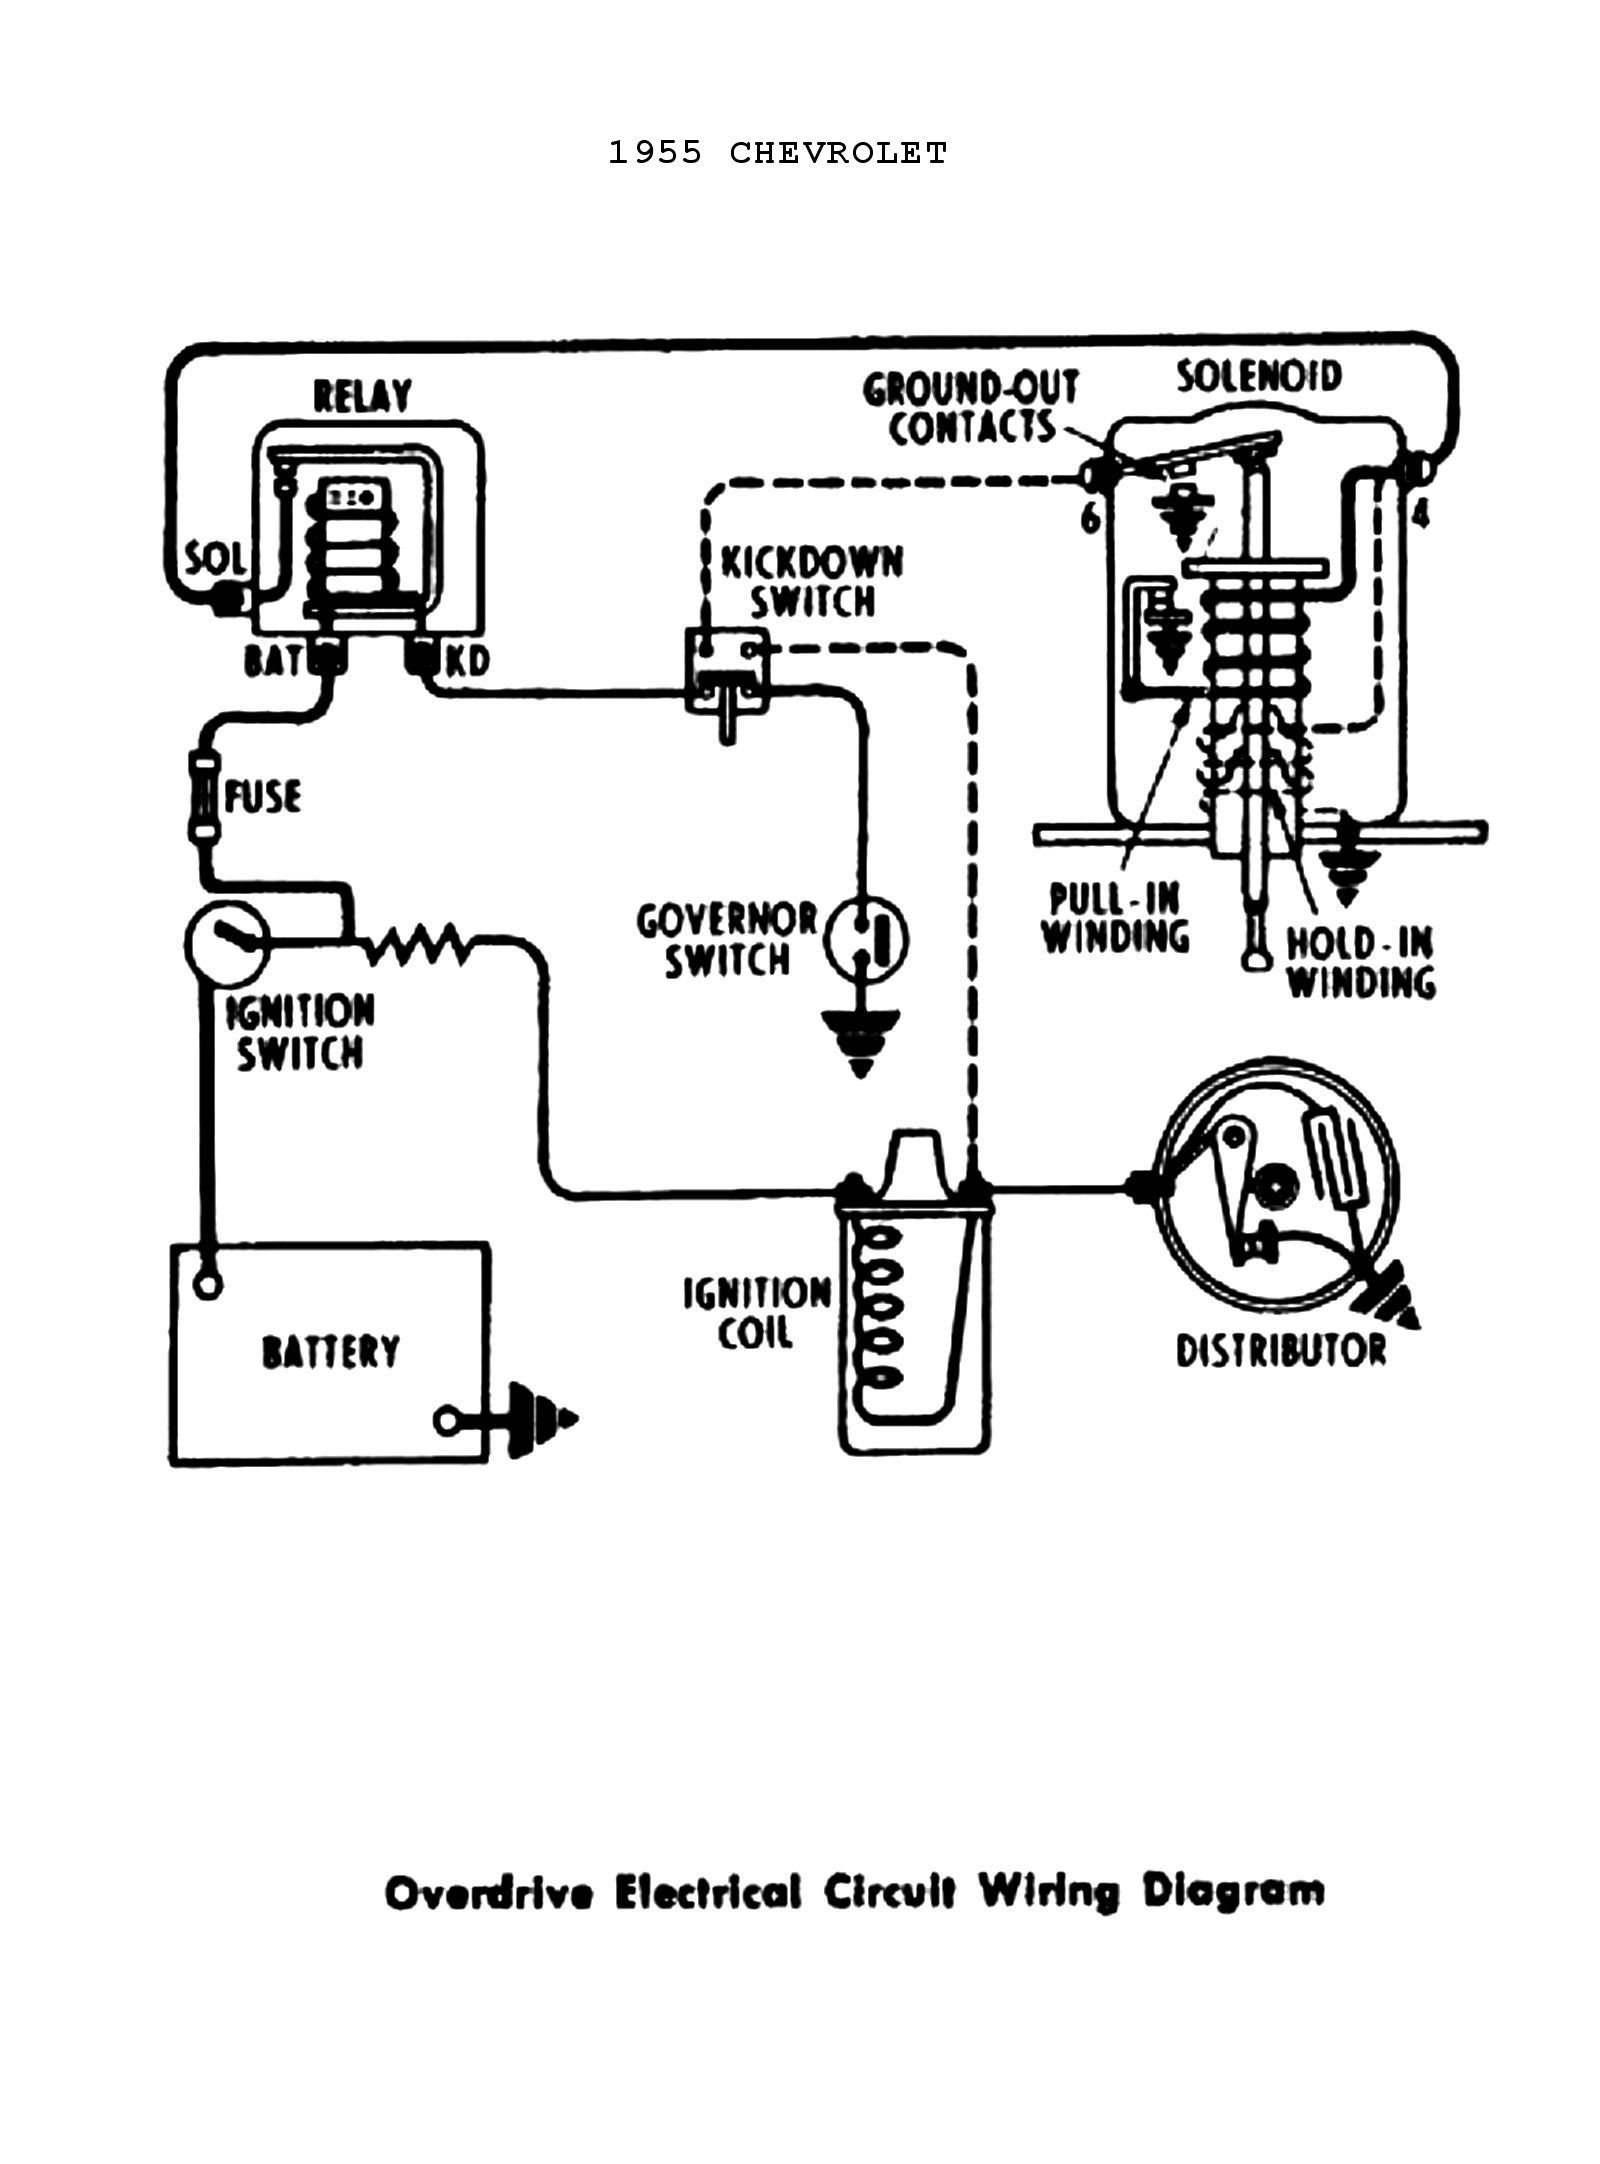 1955 Power Windows & Seats · 1955 Overdrive Circuit Chevy Wiring diagrams from gm starter solenoid